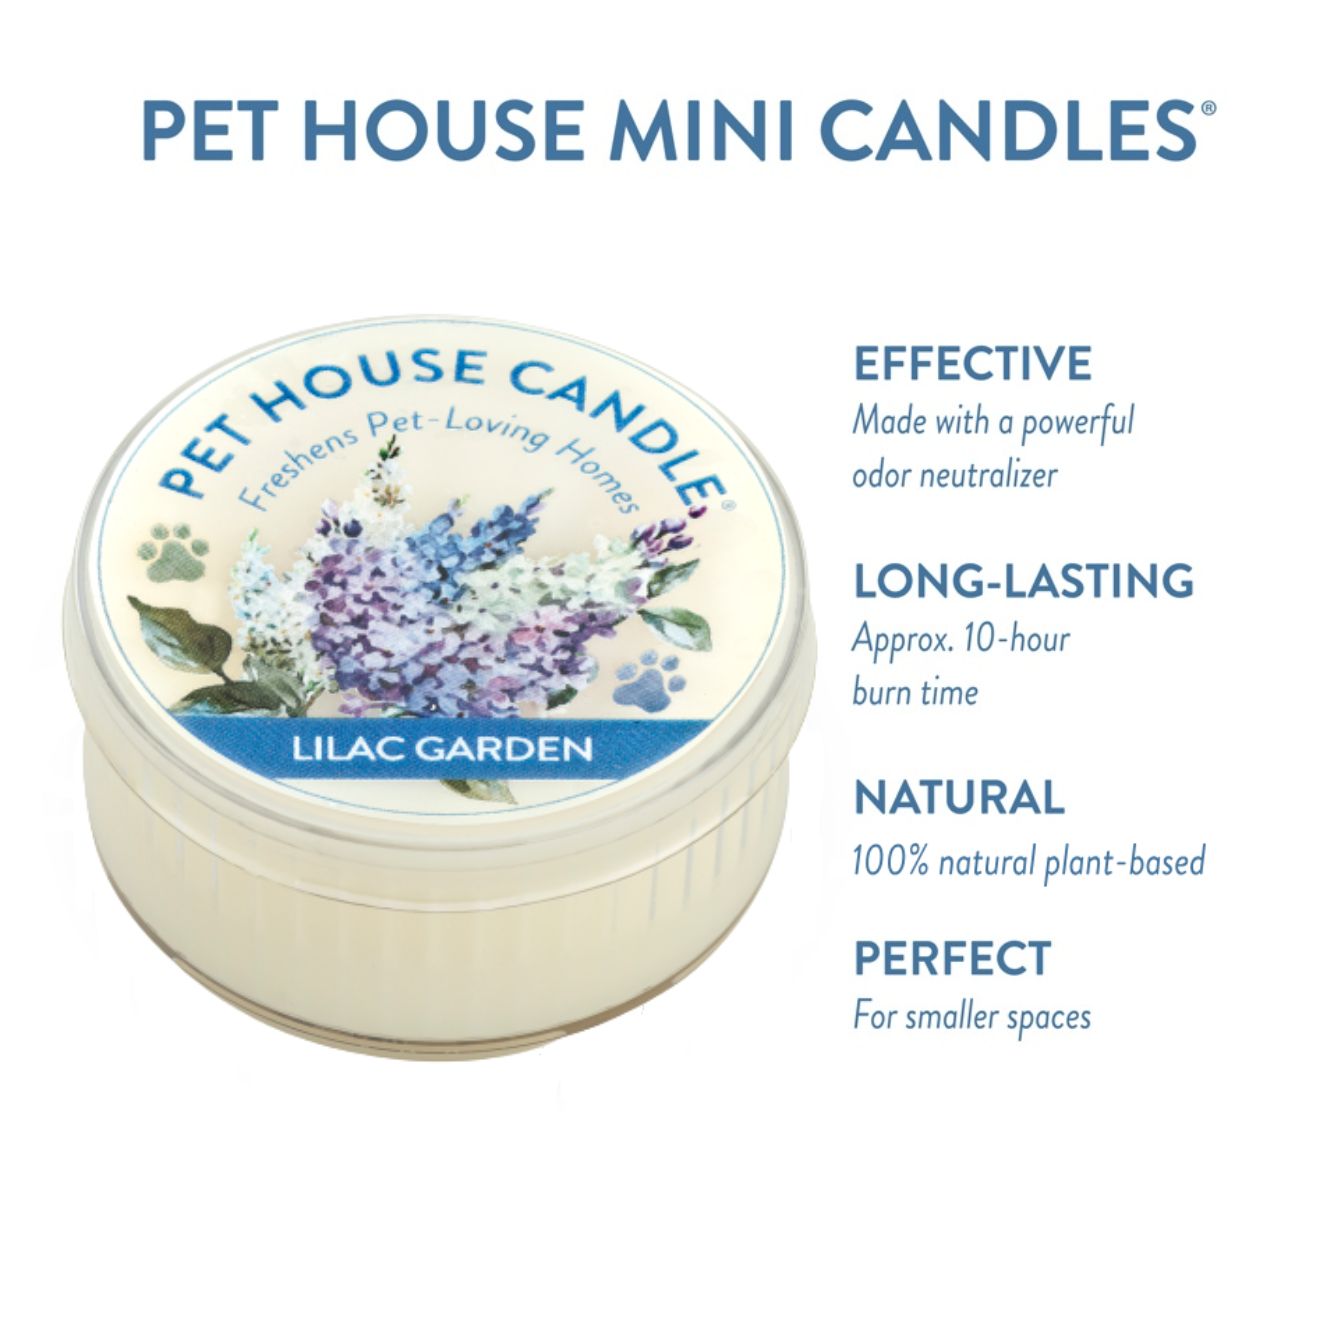 Lilac Garden Mini Candle infographics